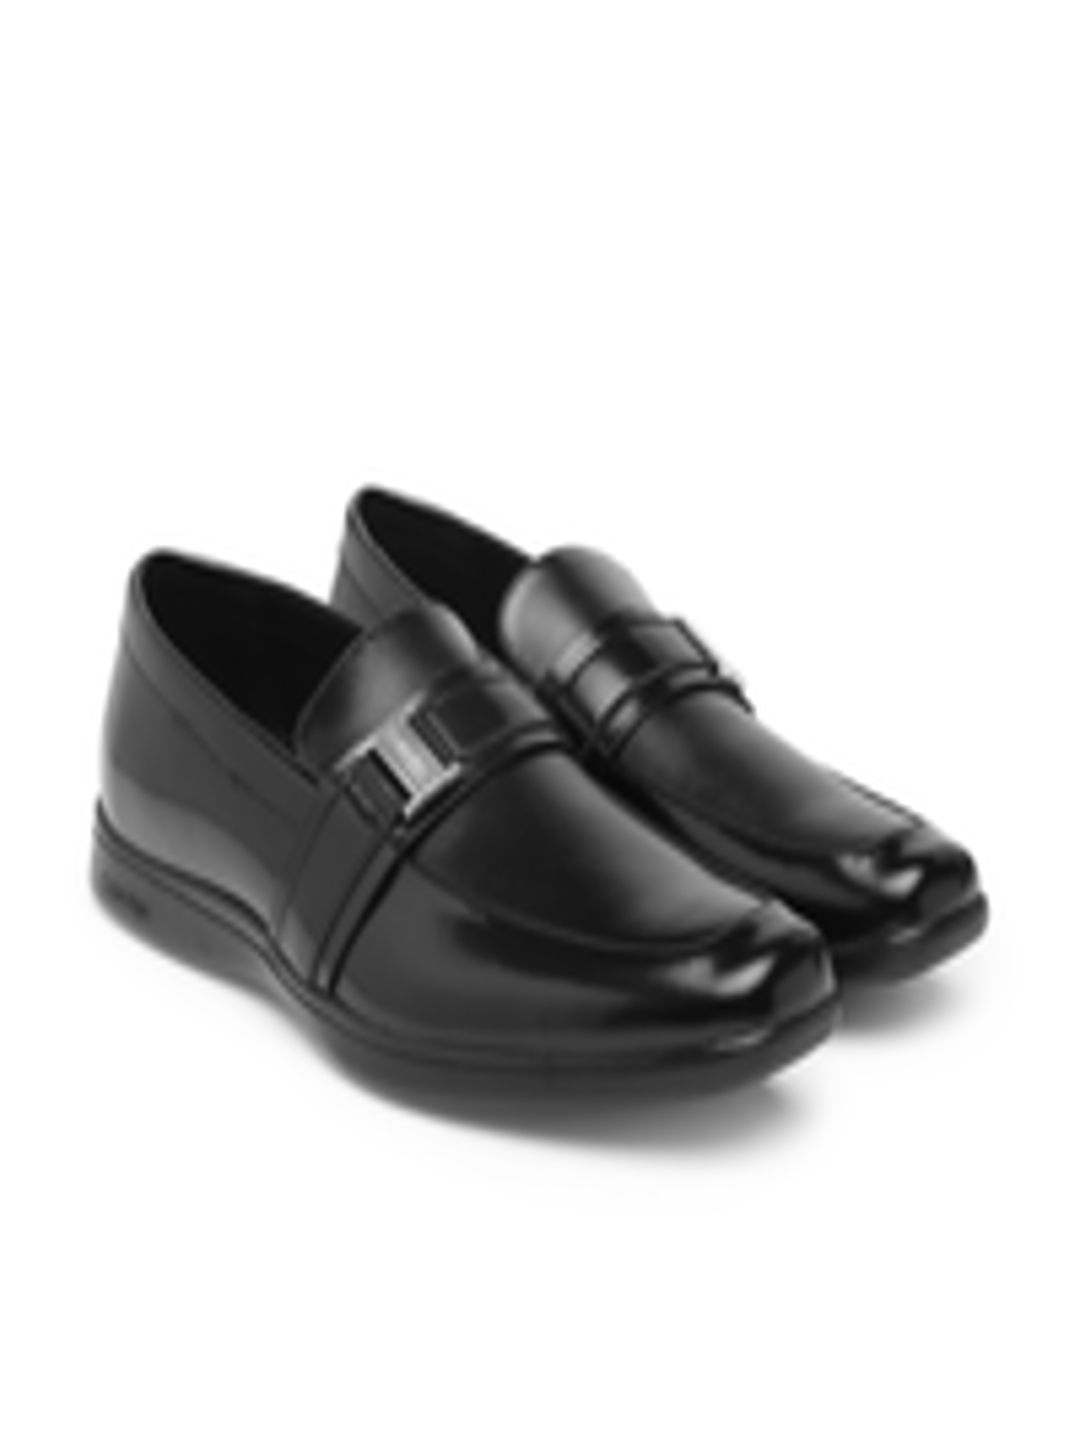  www myntra com casual shoes calvin klein calvin klein men black textured leather loafers 10622332 buy